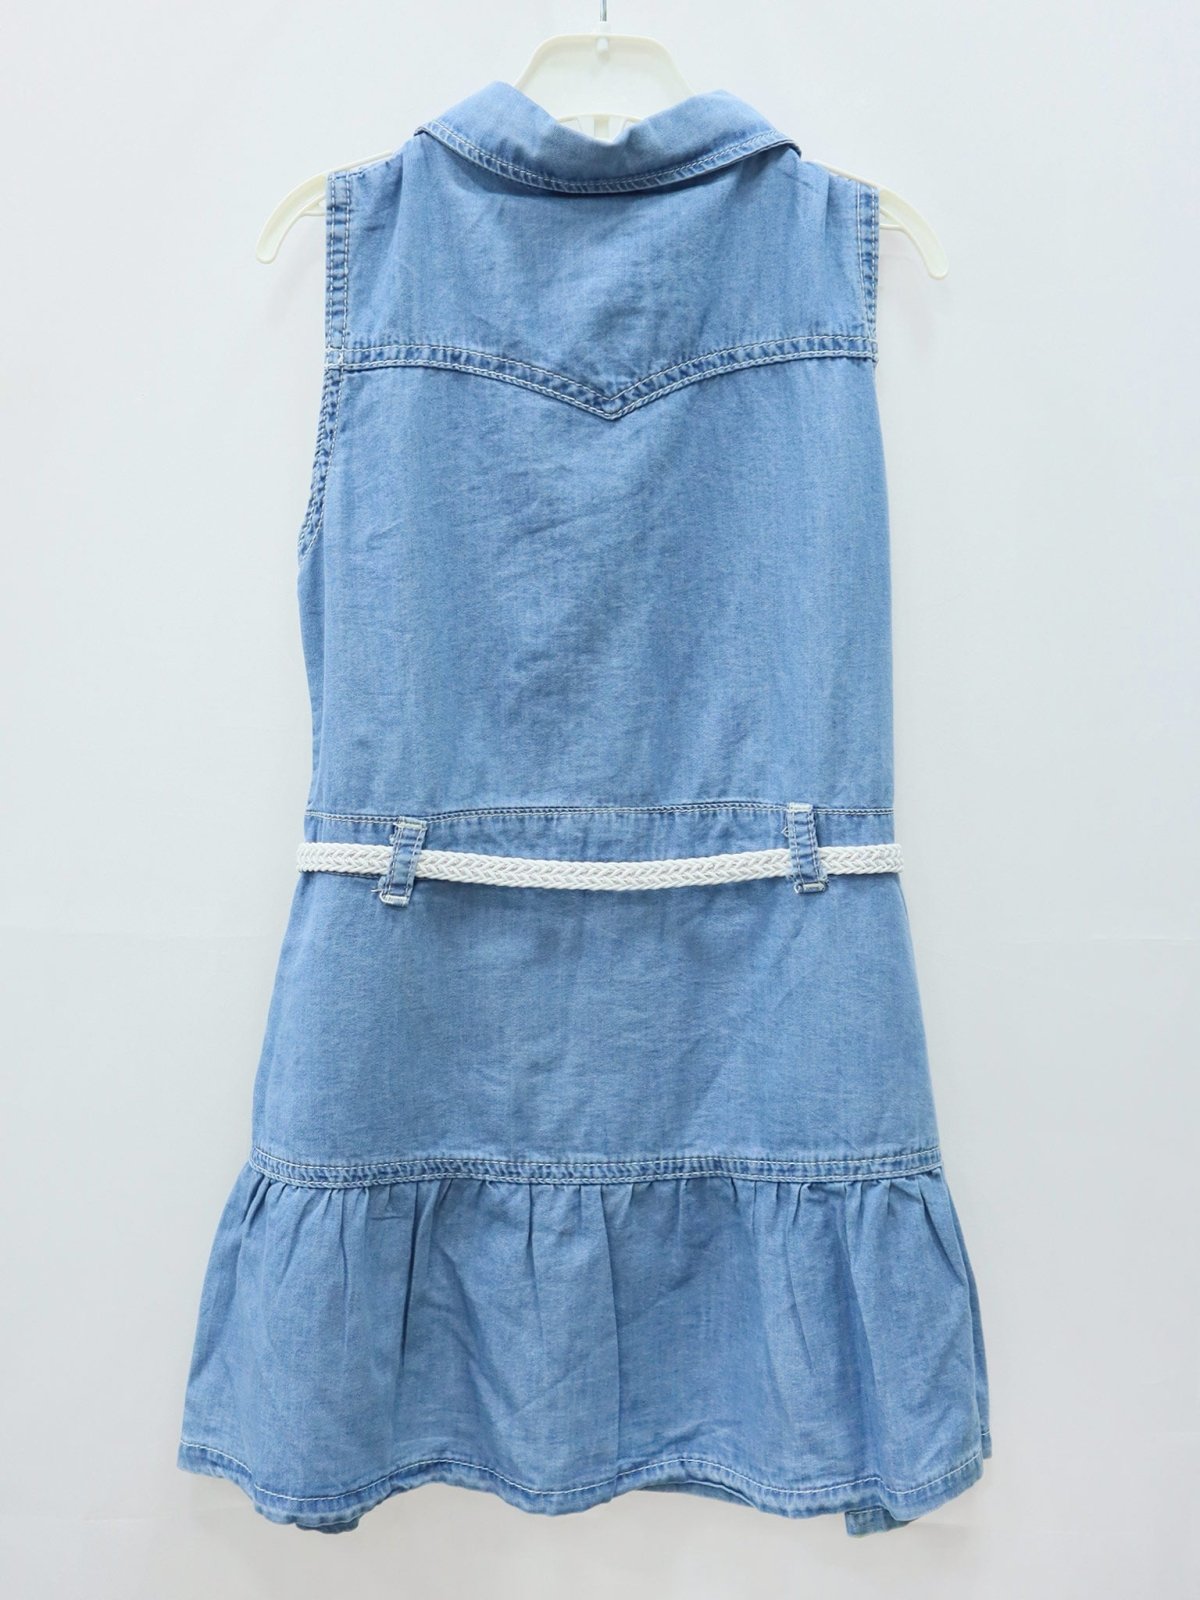 Denim Top for Girls with Straps Purse